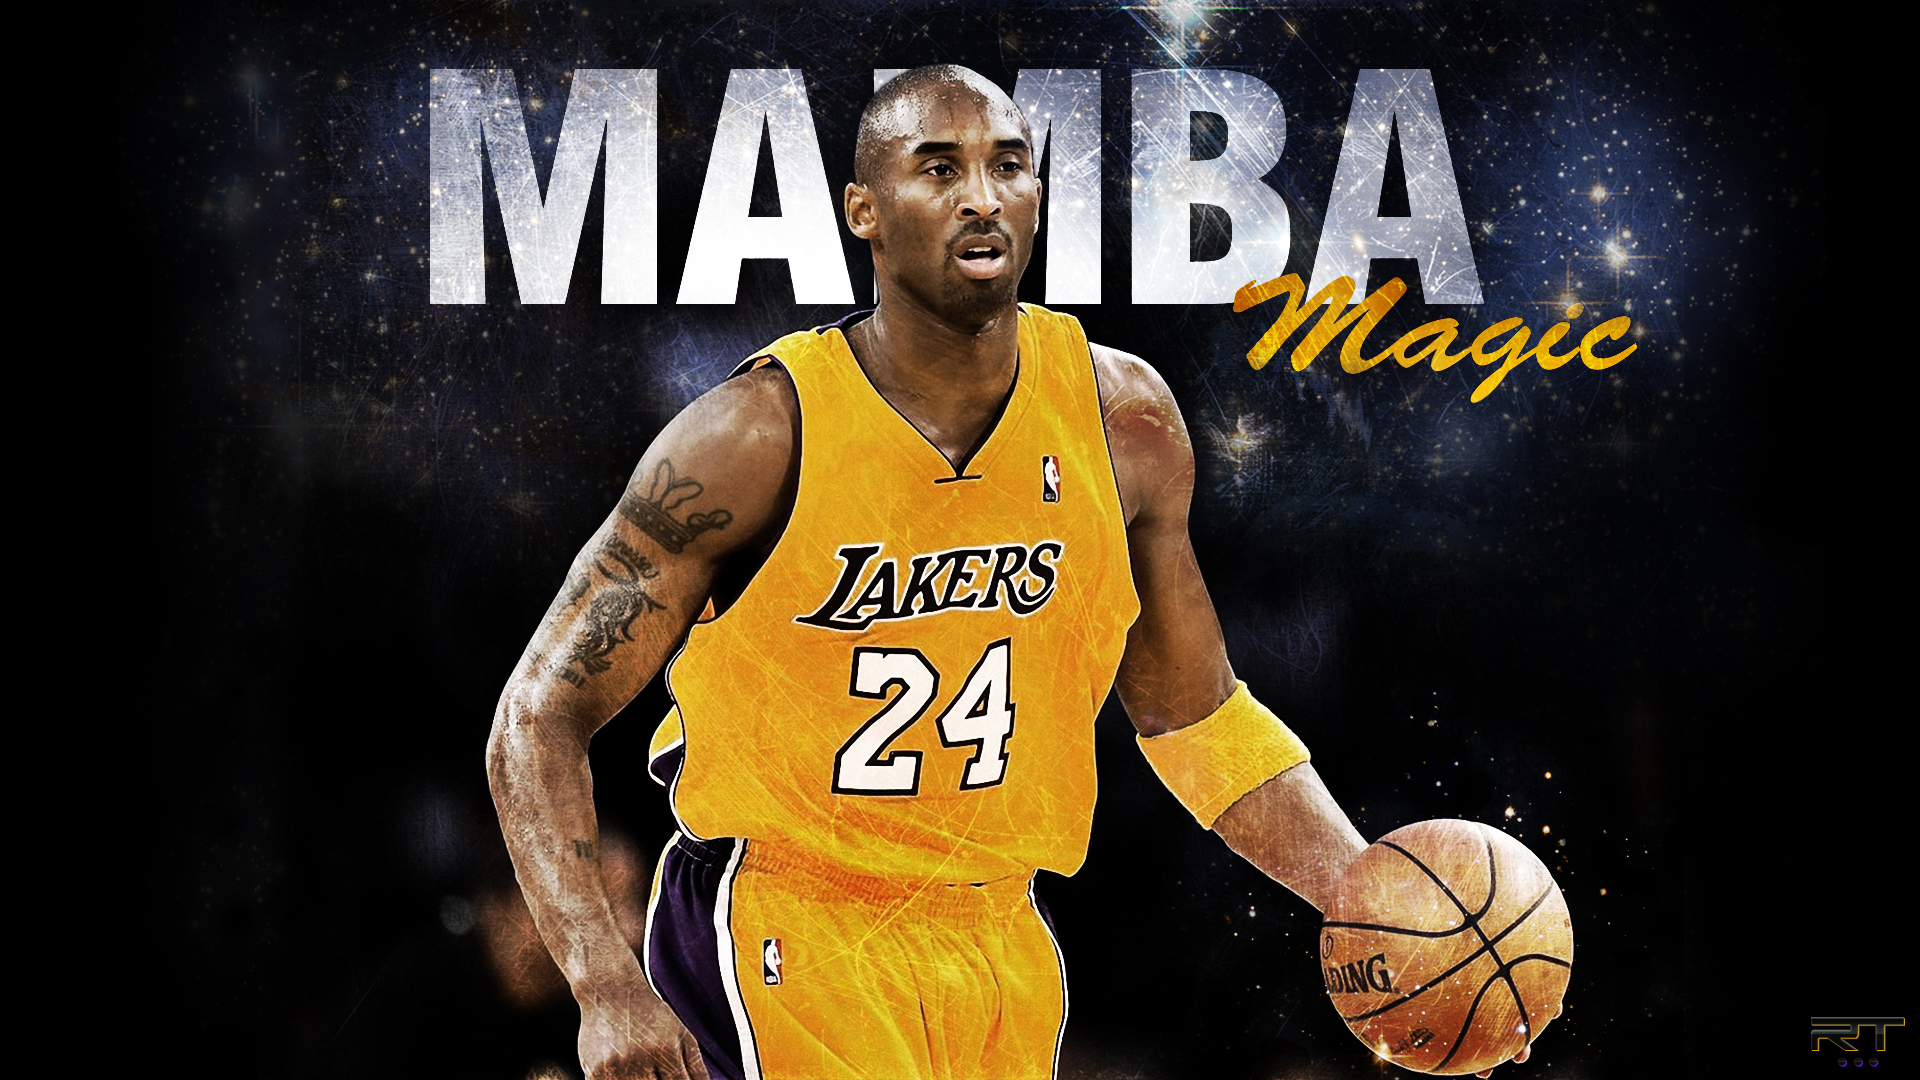 Kobe Bryant Wallpaper High Resolution and Quality Download